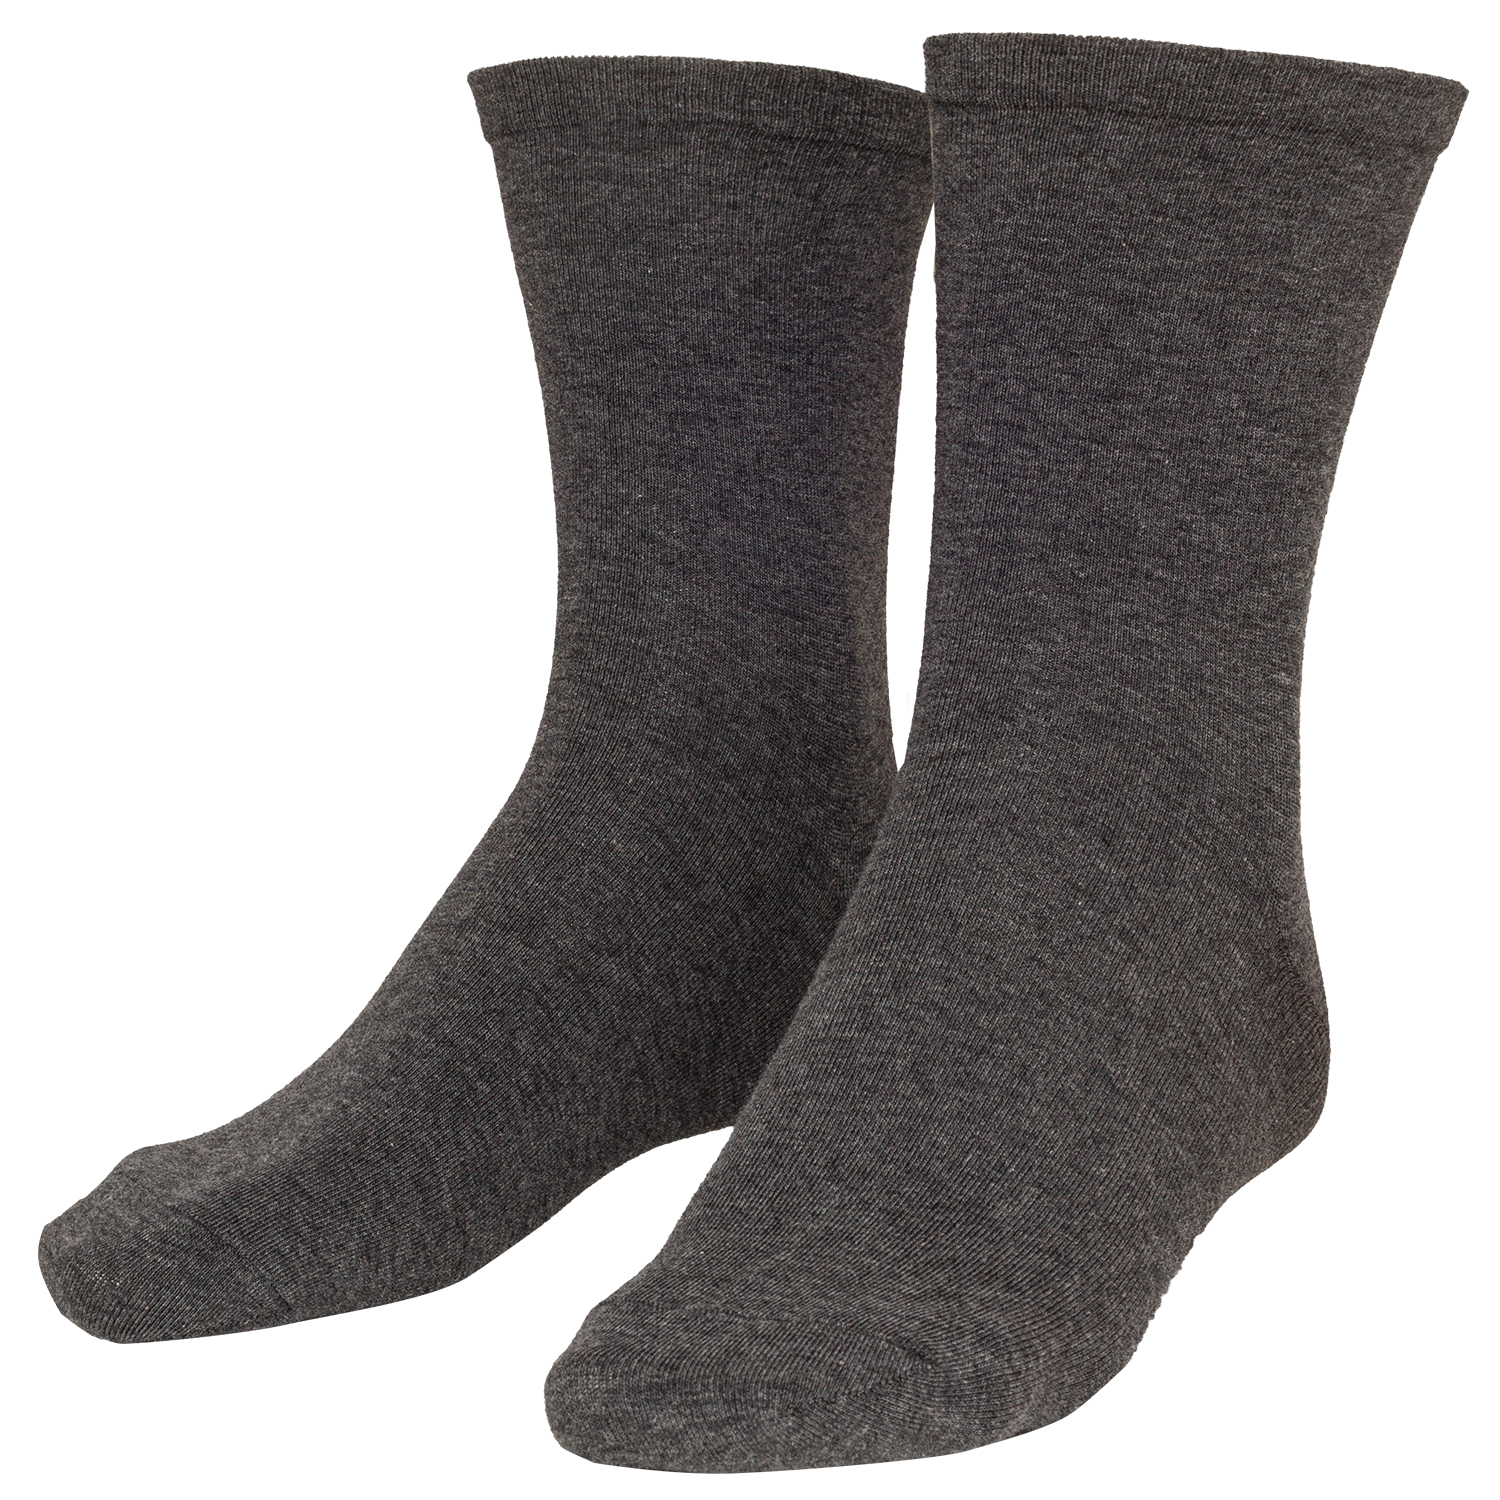 Sock sensitive in anthracite mottled men's double pack up to size 51/54